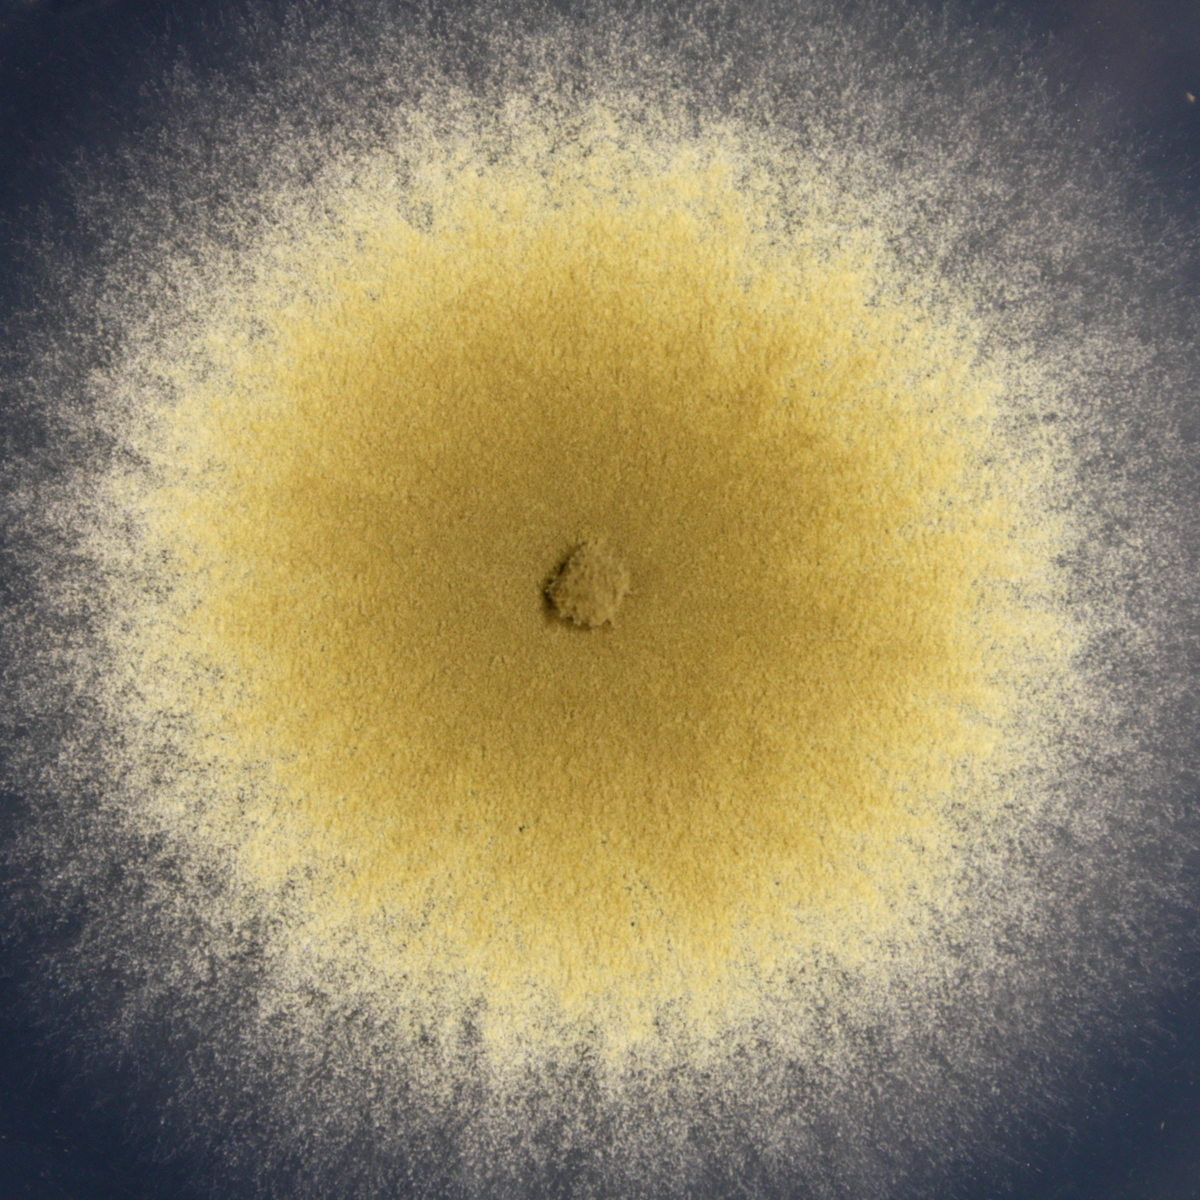 Paecilomyces variotii strain CBS 101075 growing on potato dextrose agar. The yellow-brown color is due to the abundant production of asexual spores. Image provided by Alexander Idnurm.